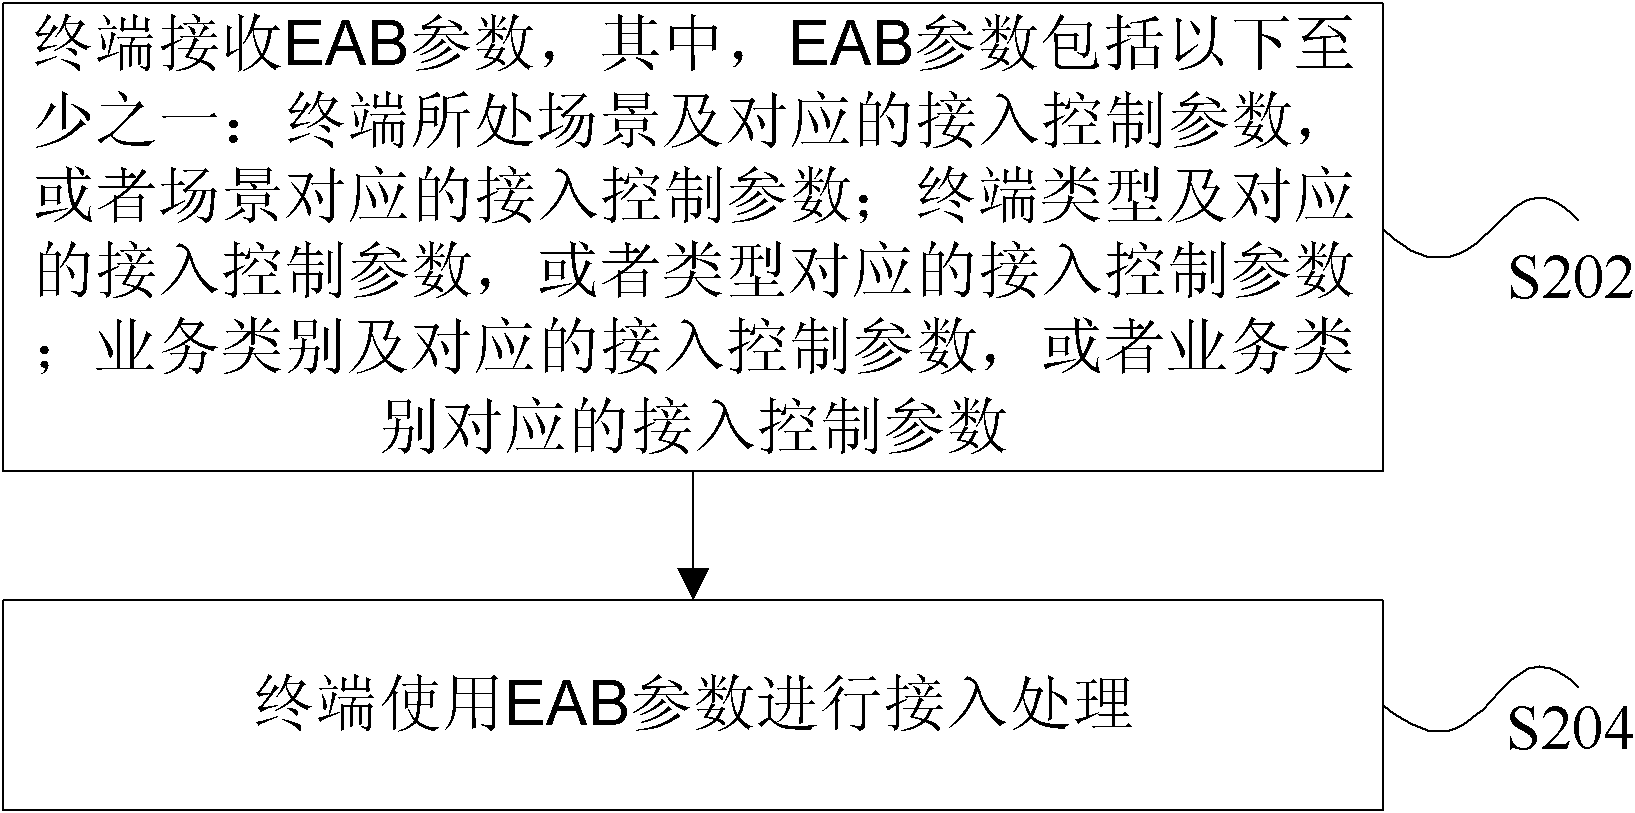 Processing method and device for EAB (Extended Access Barring), access processing method, device and system